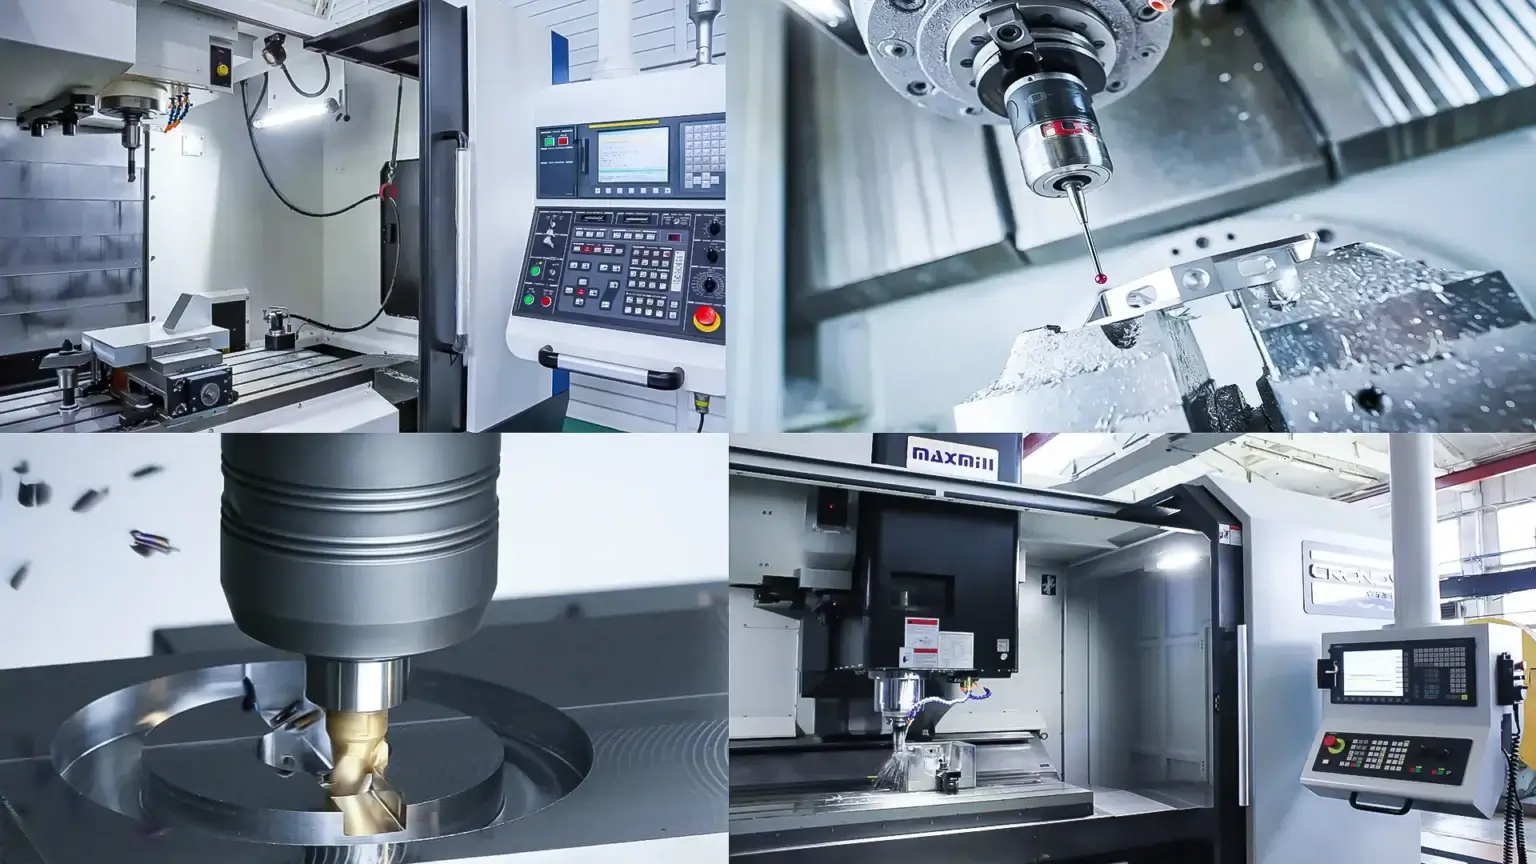 CNC Milling Process And Equipment